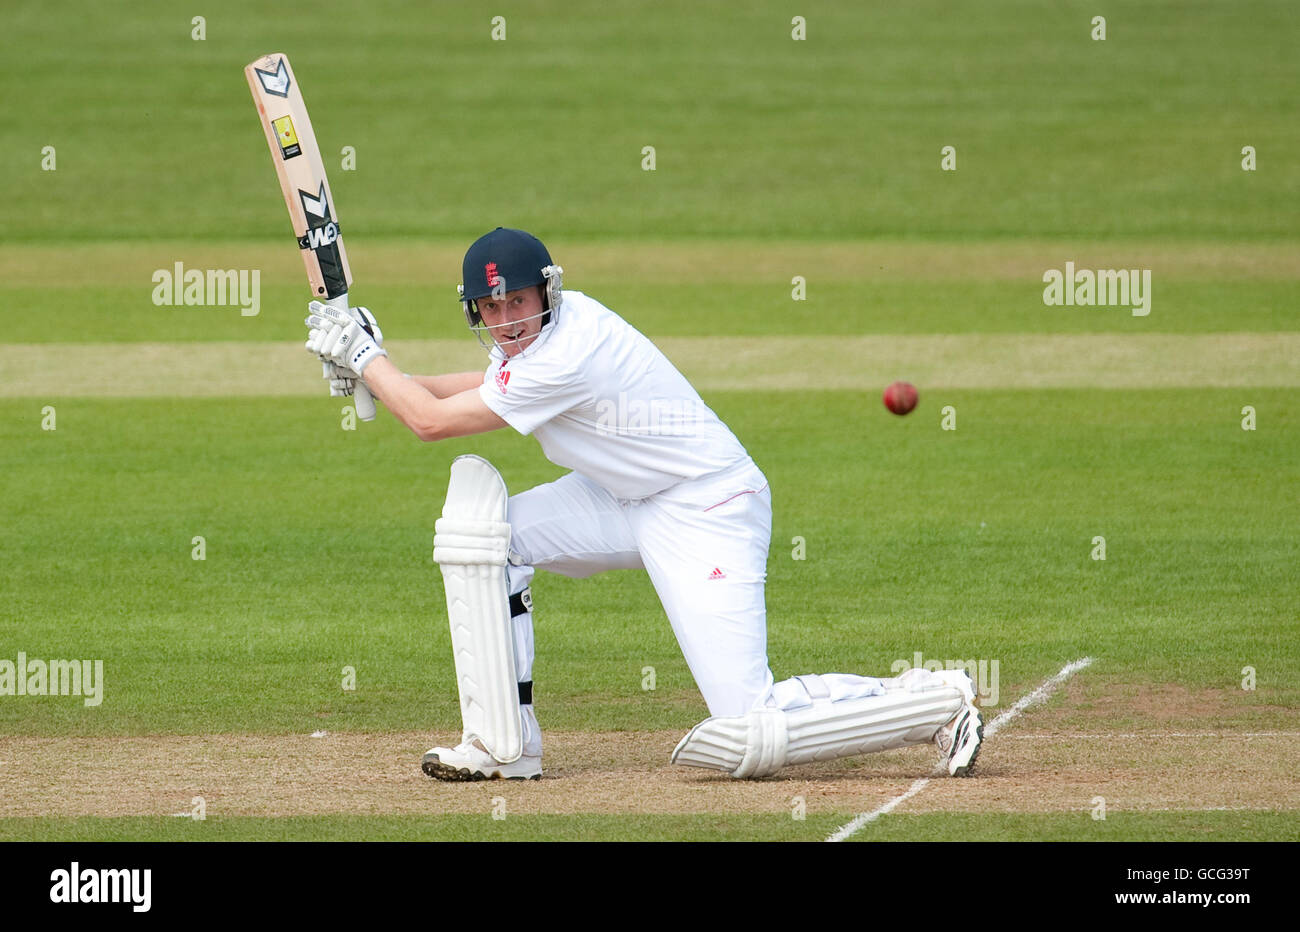 Cricket - International Tour Match - England Lions v Bangladesh - Day Two - County Ground. England Lions' Andrew Gale bats during the Tour Match at the County Ground, Derby. Stock Photo